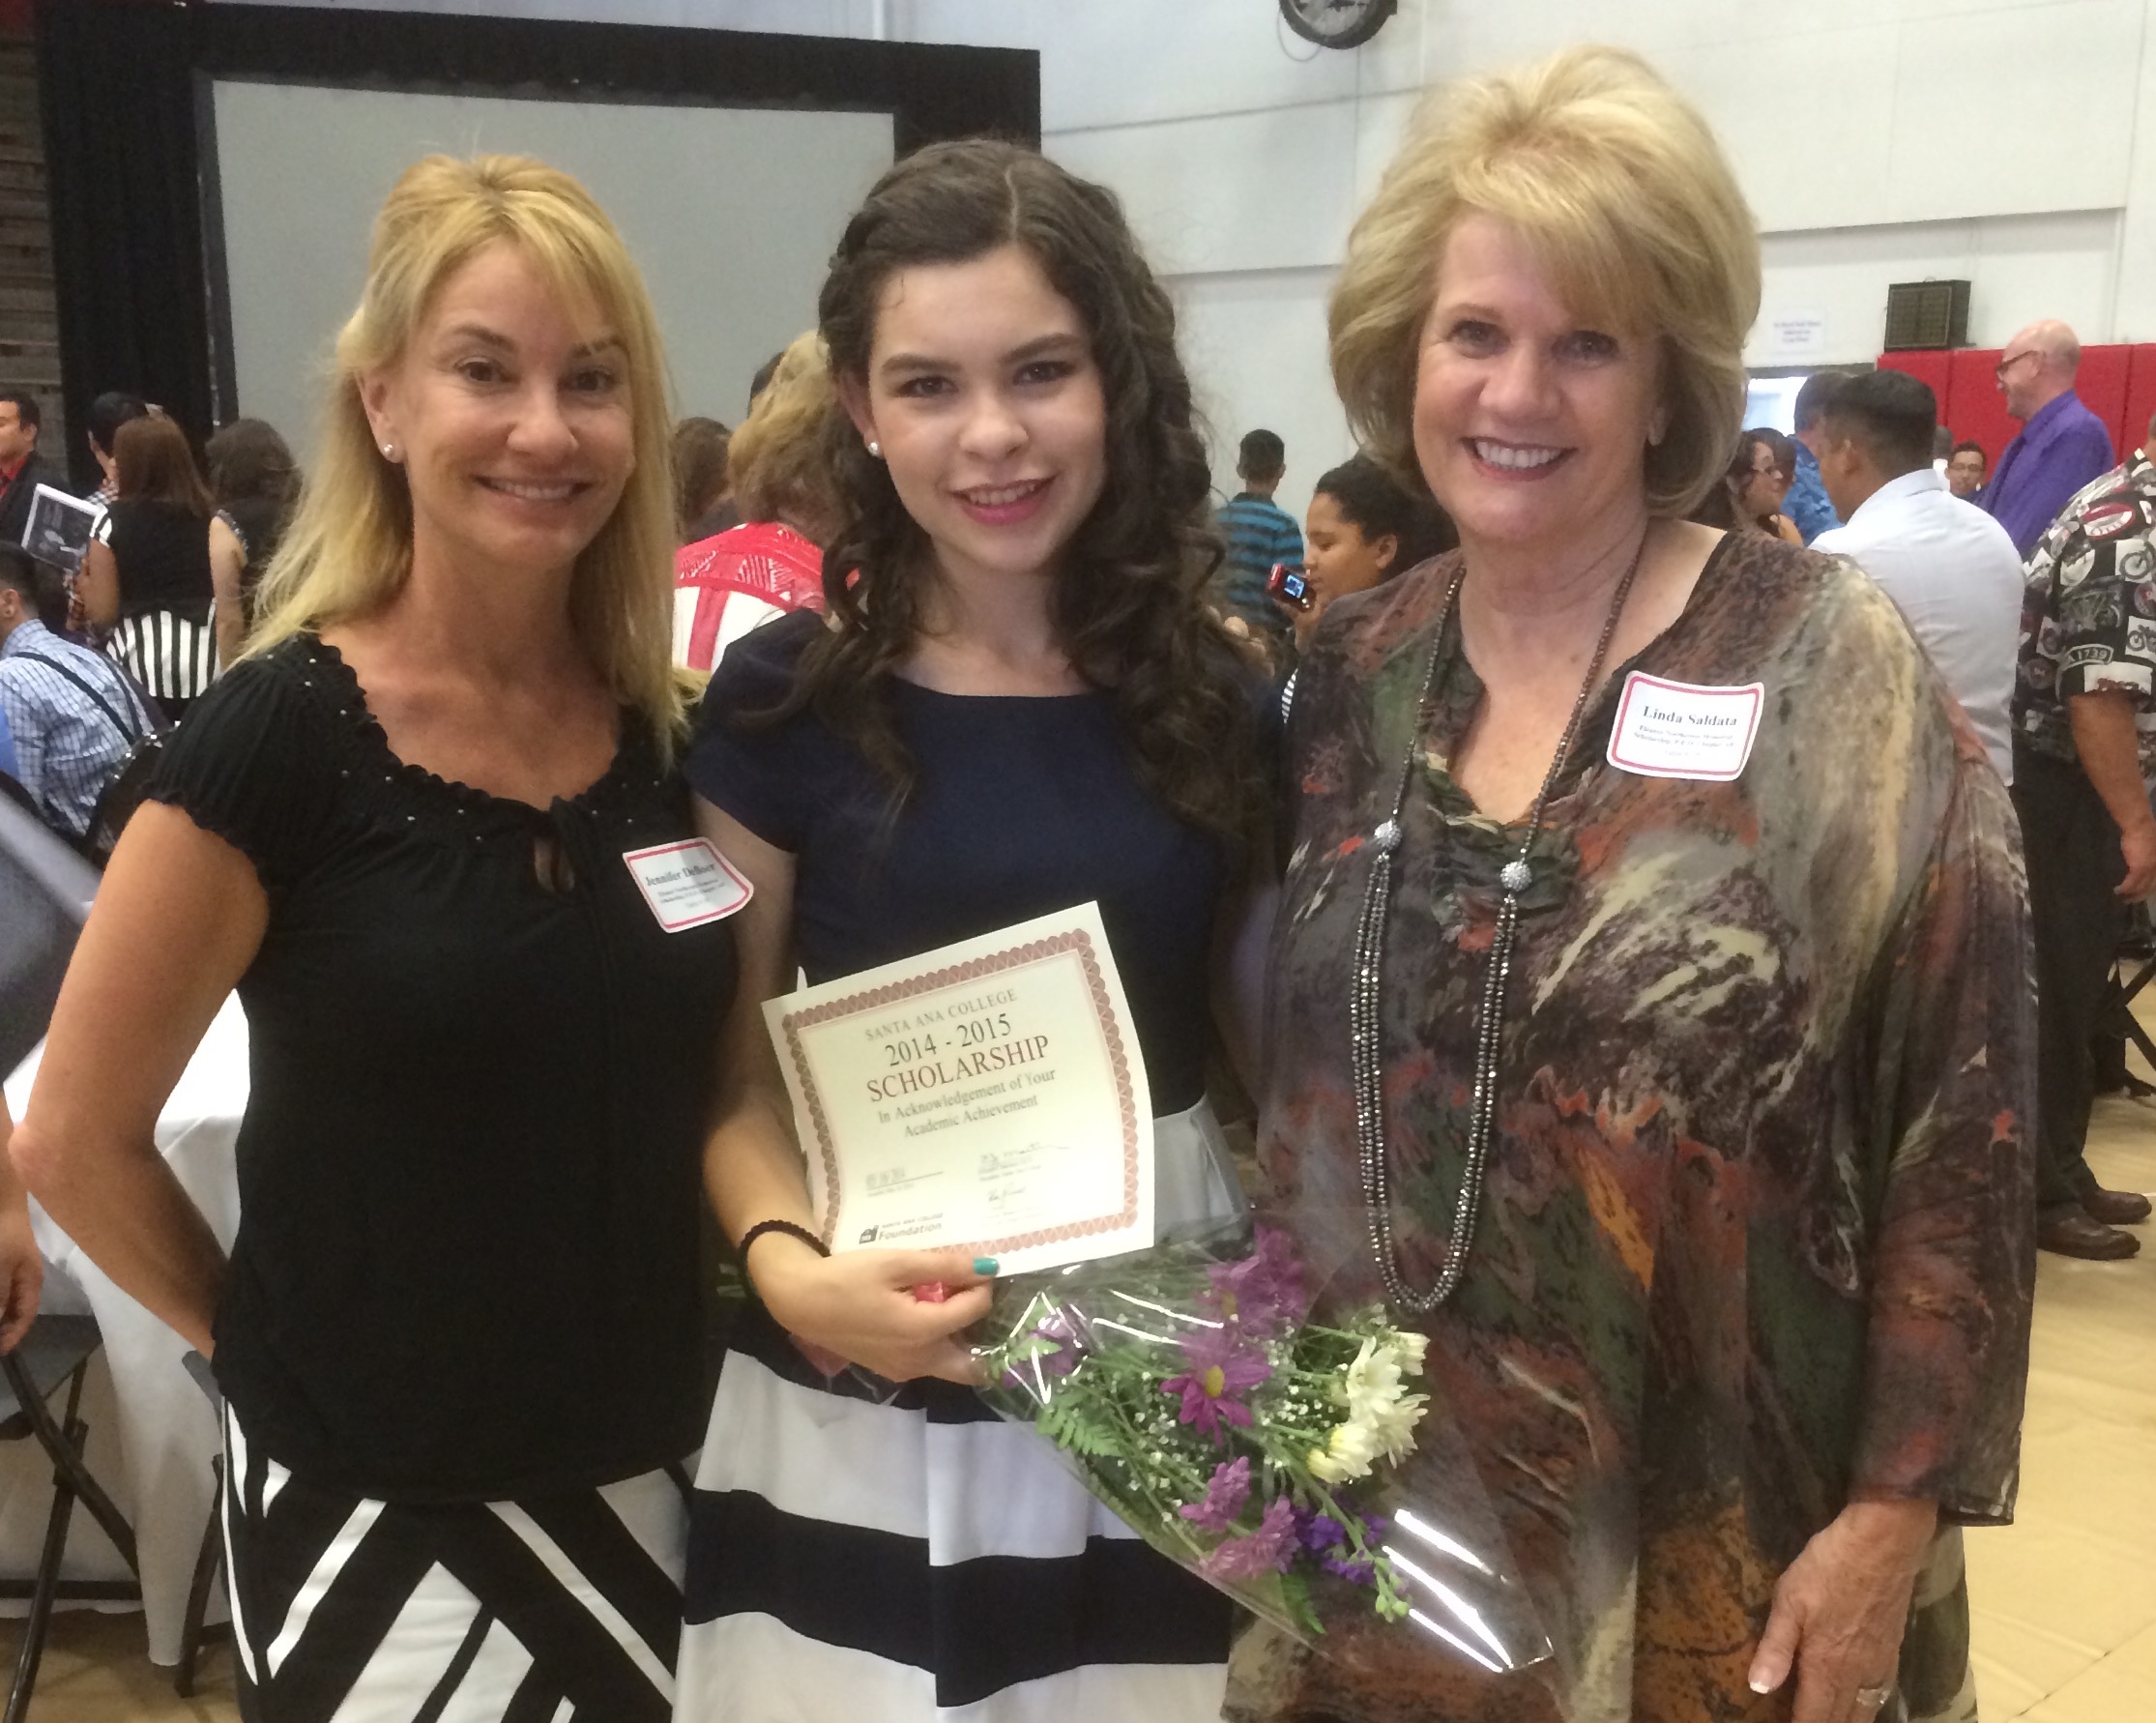 Claudia (middle) with SAC Foundation donors at the 2015 SAC Scholarship Ceremony